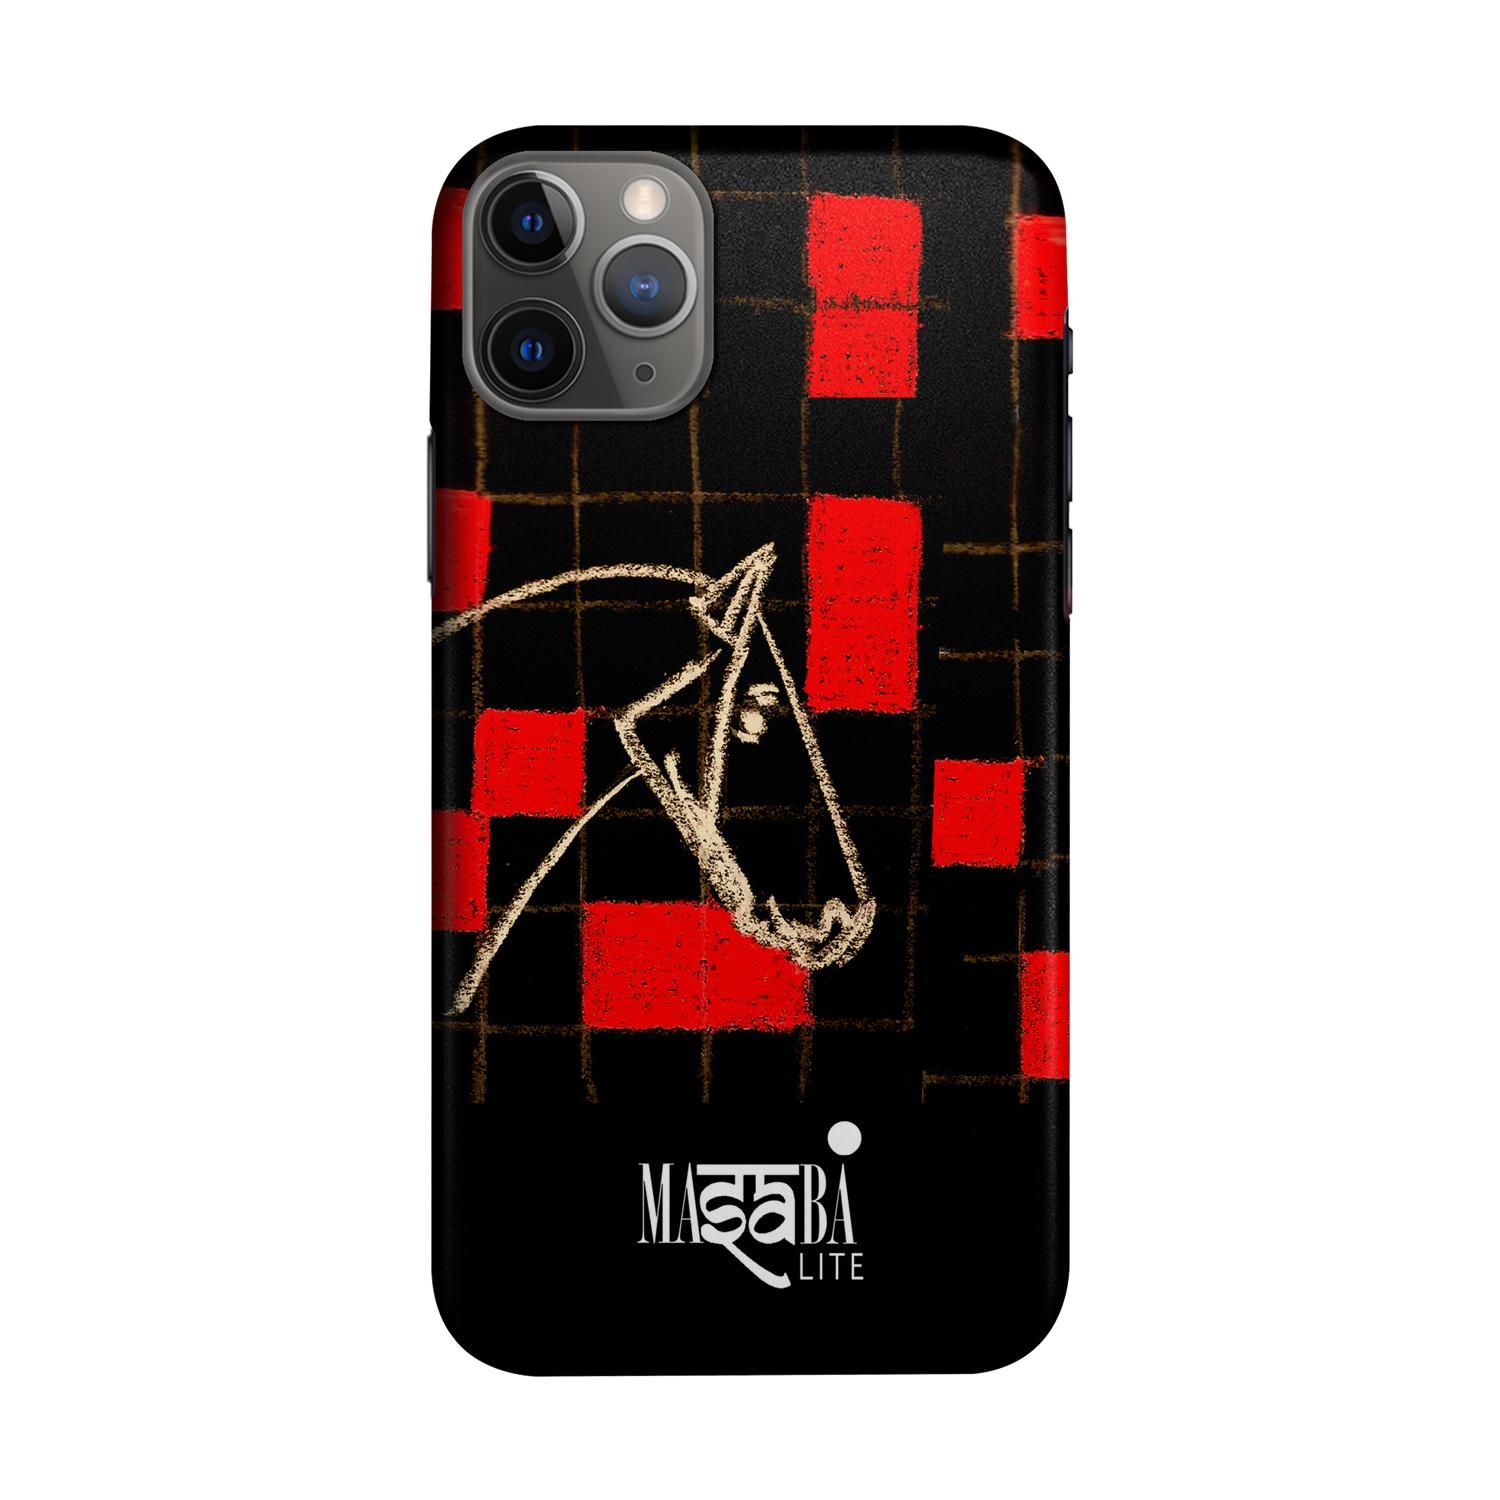 Buy Masaba Red Checkered Horse - Sleek Phone Case for iPhone 11 Pro Max Online